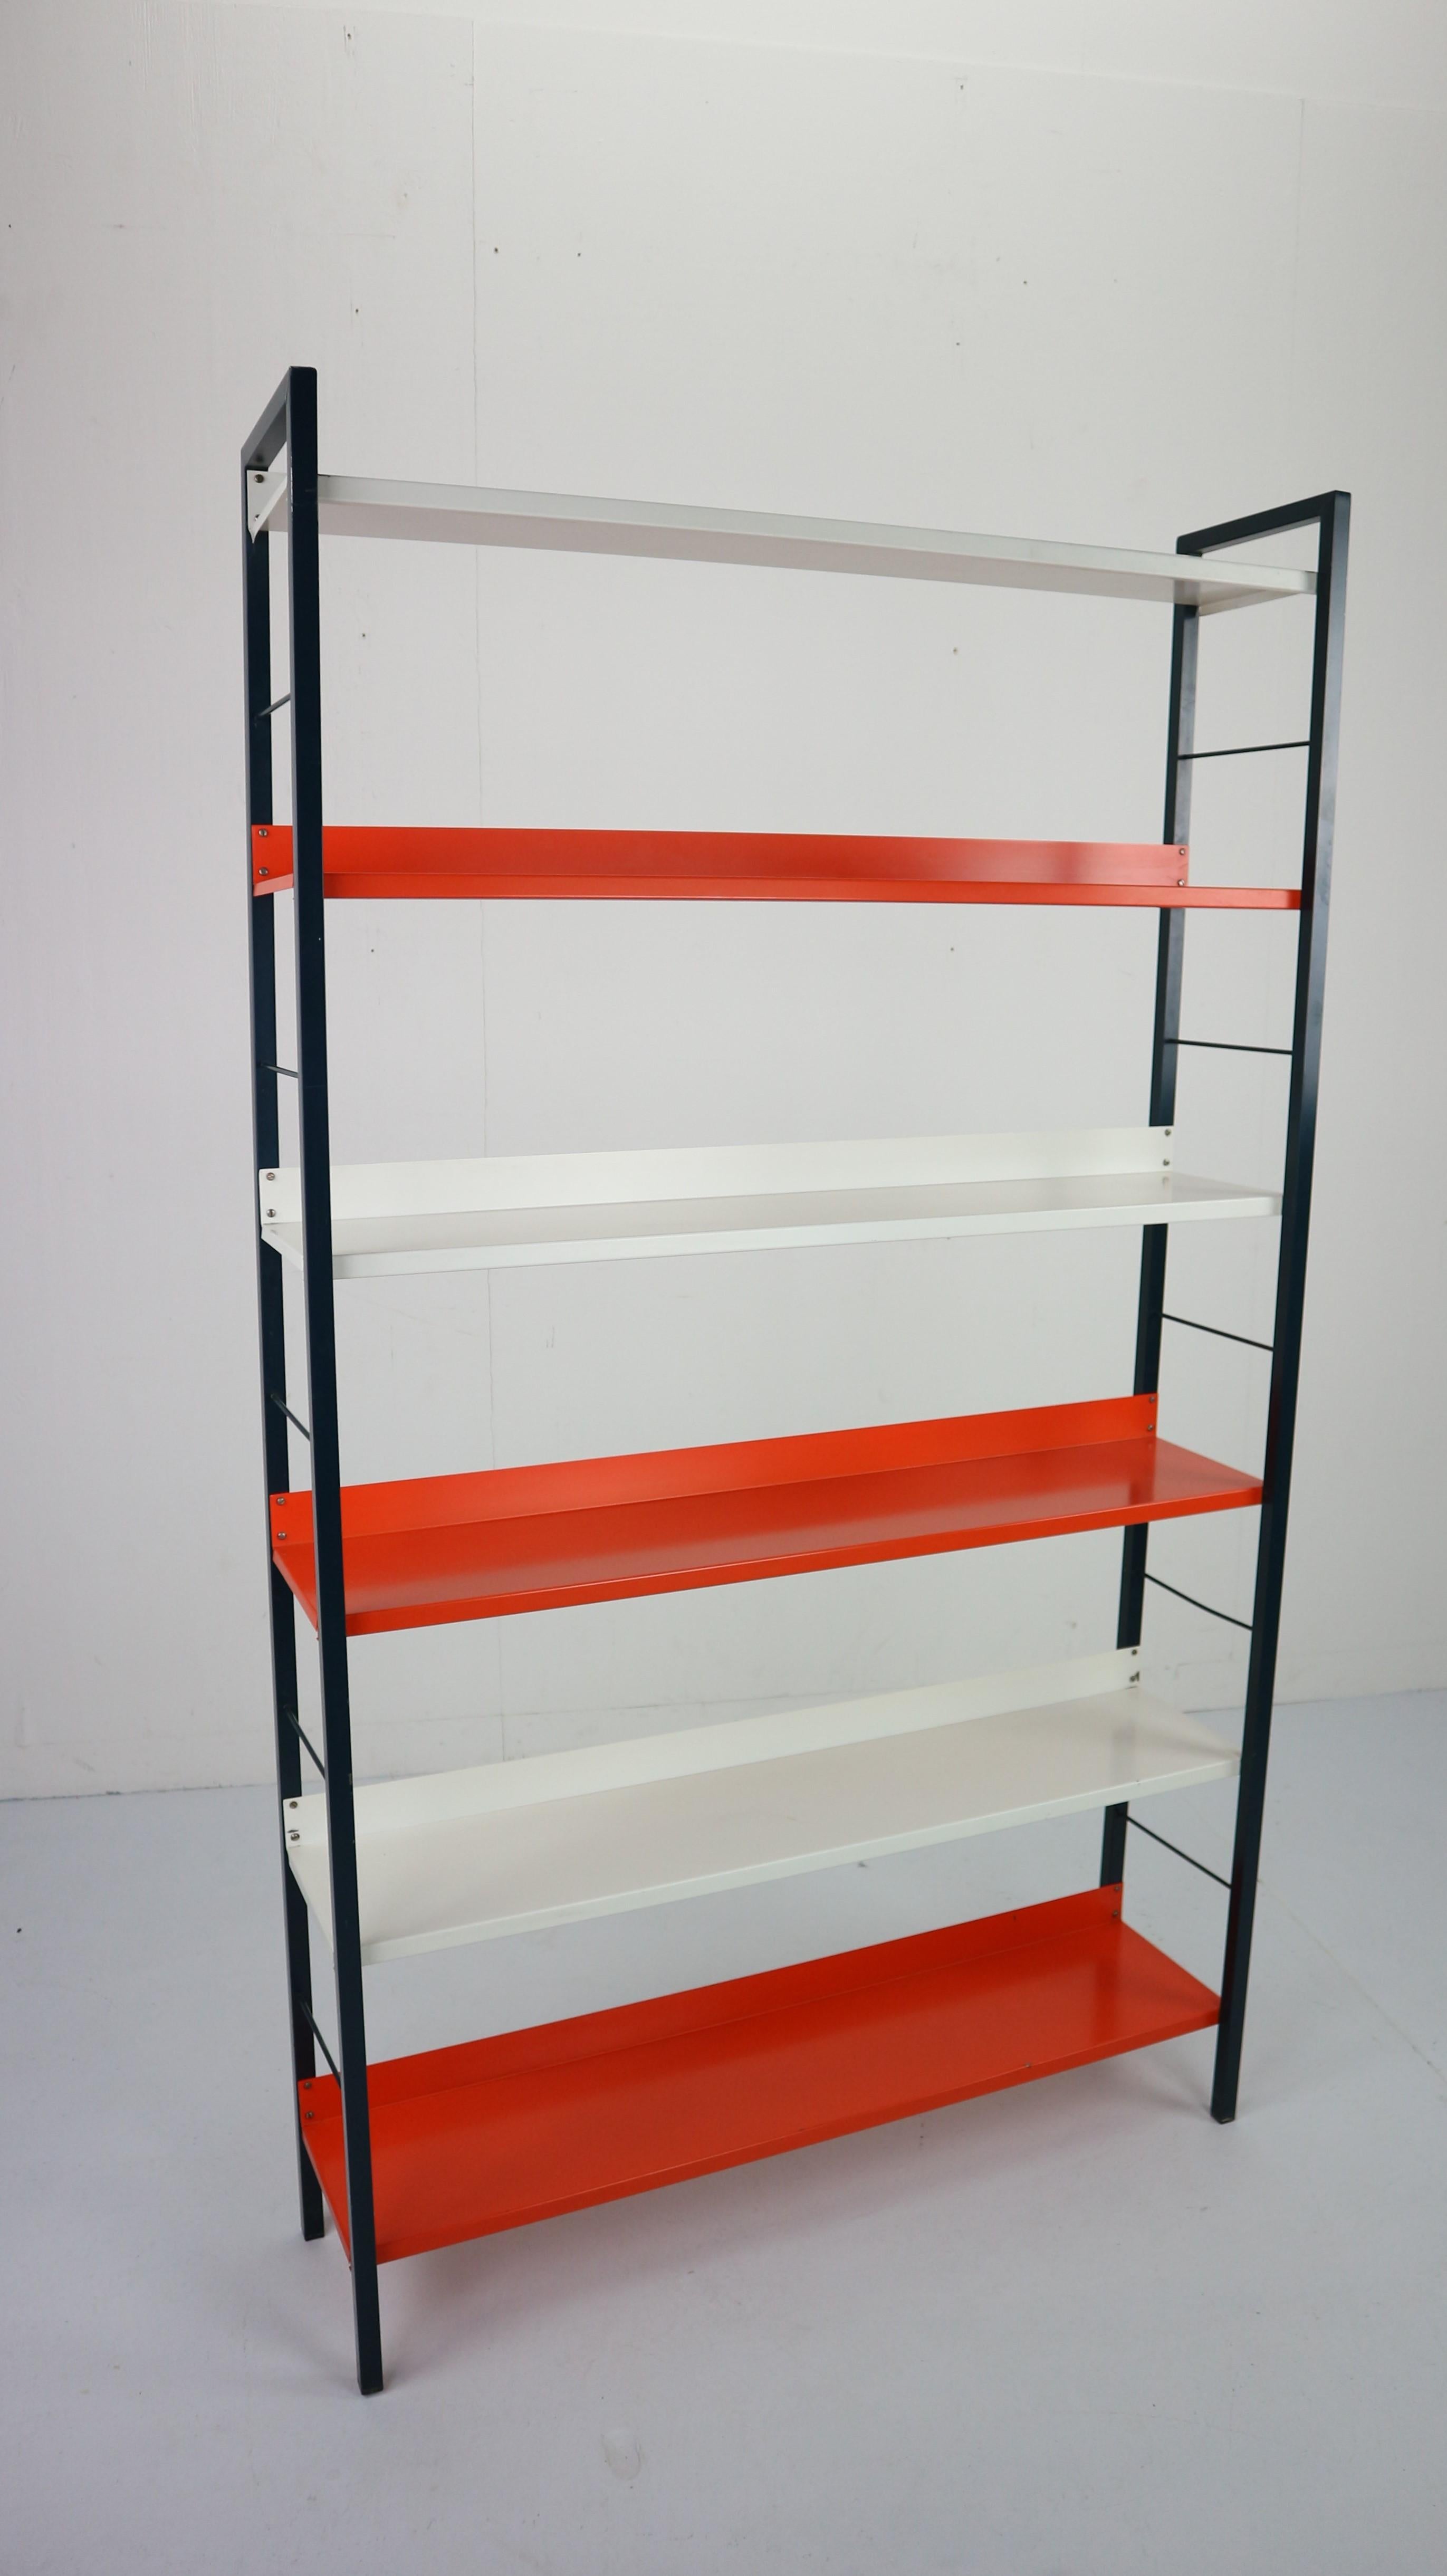 This vintage industrial freestanding metal bookcase was designed by A. Dekker for Tomado in Holland 1950s.
Rare large version with six shelves in orange, white and navy colors.
Typical Dutch modernist design.
In very good vintage condition some